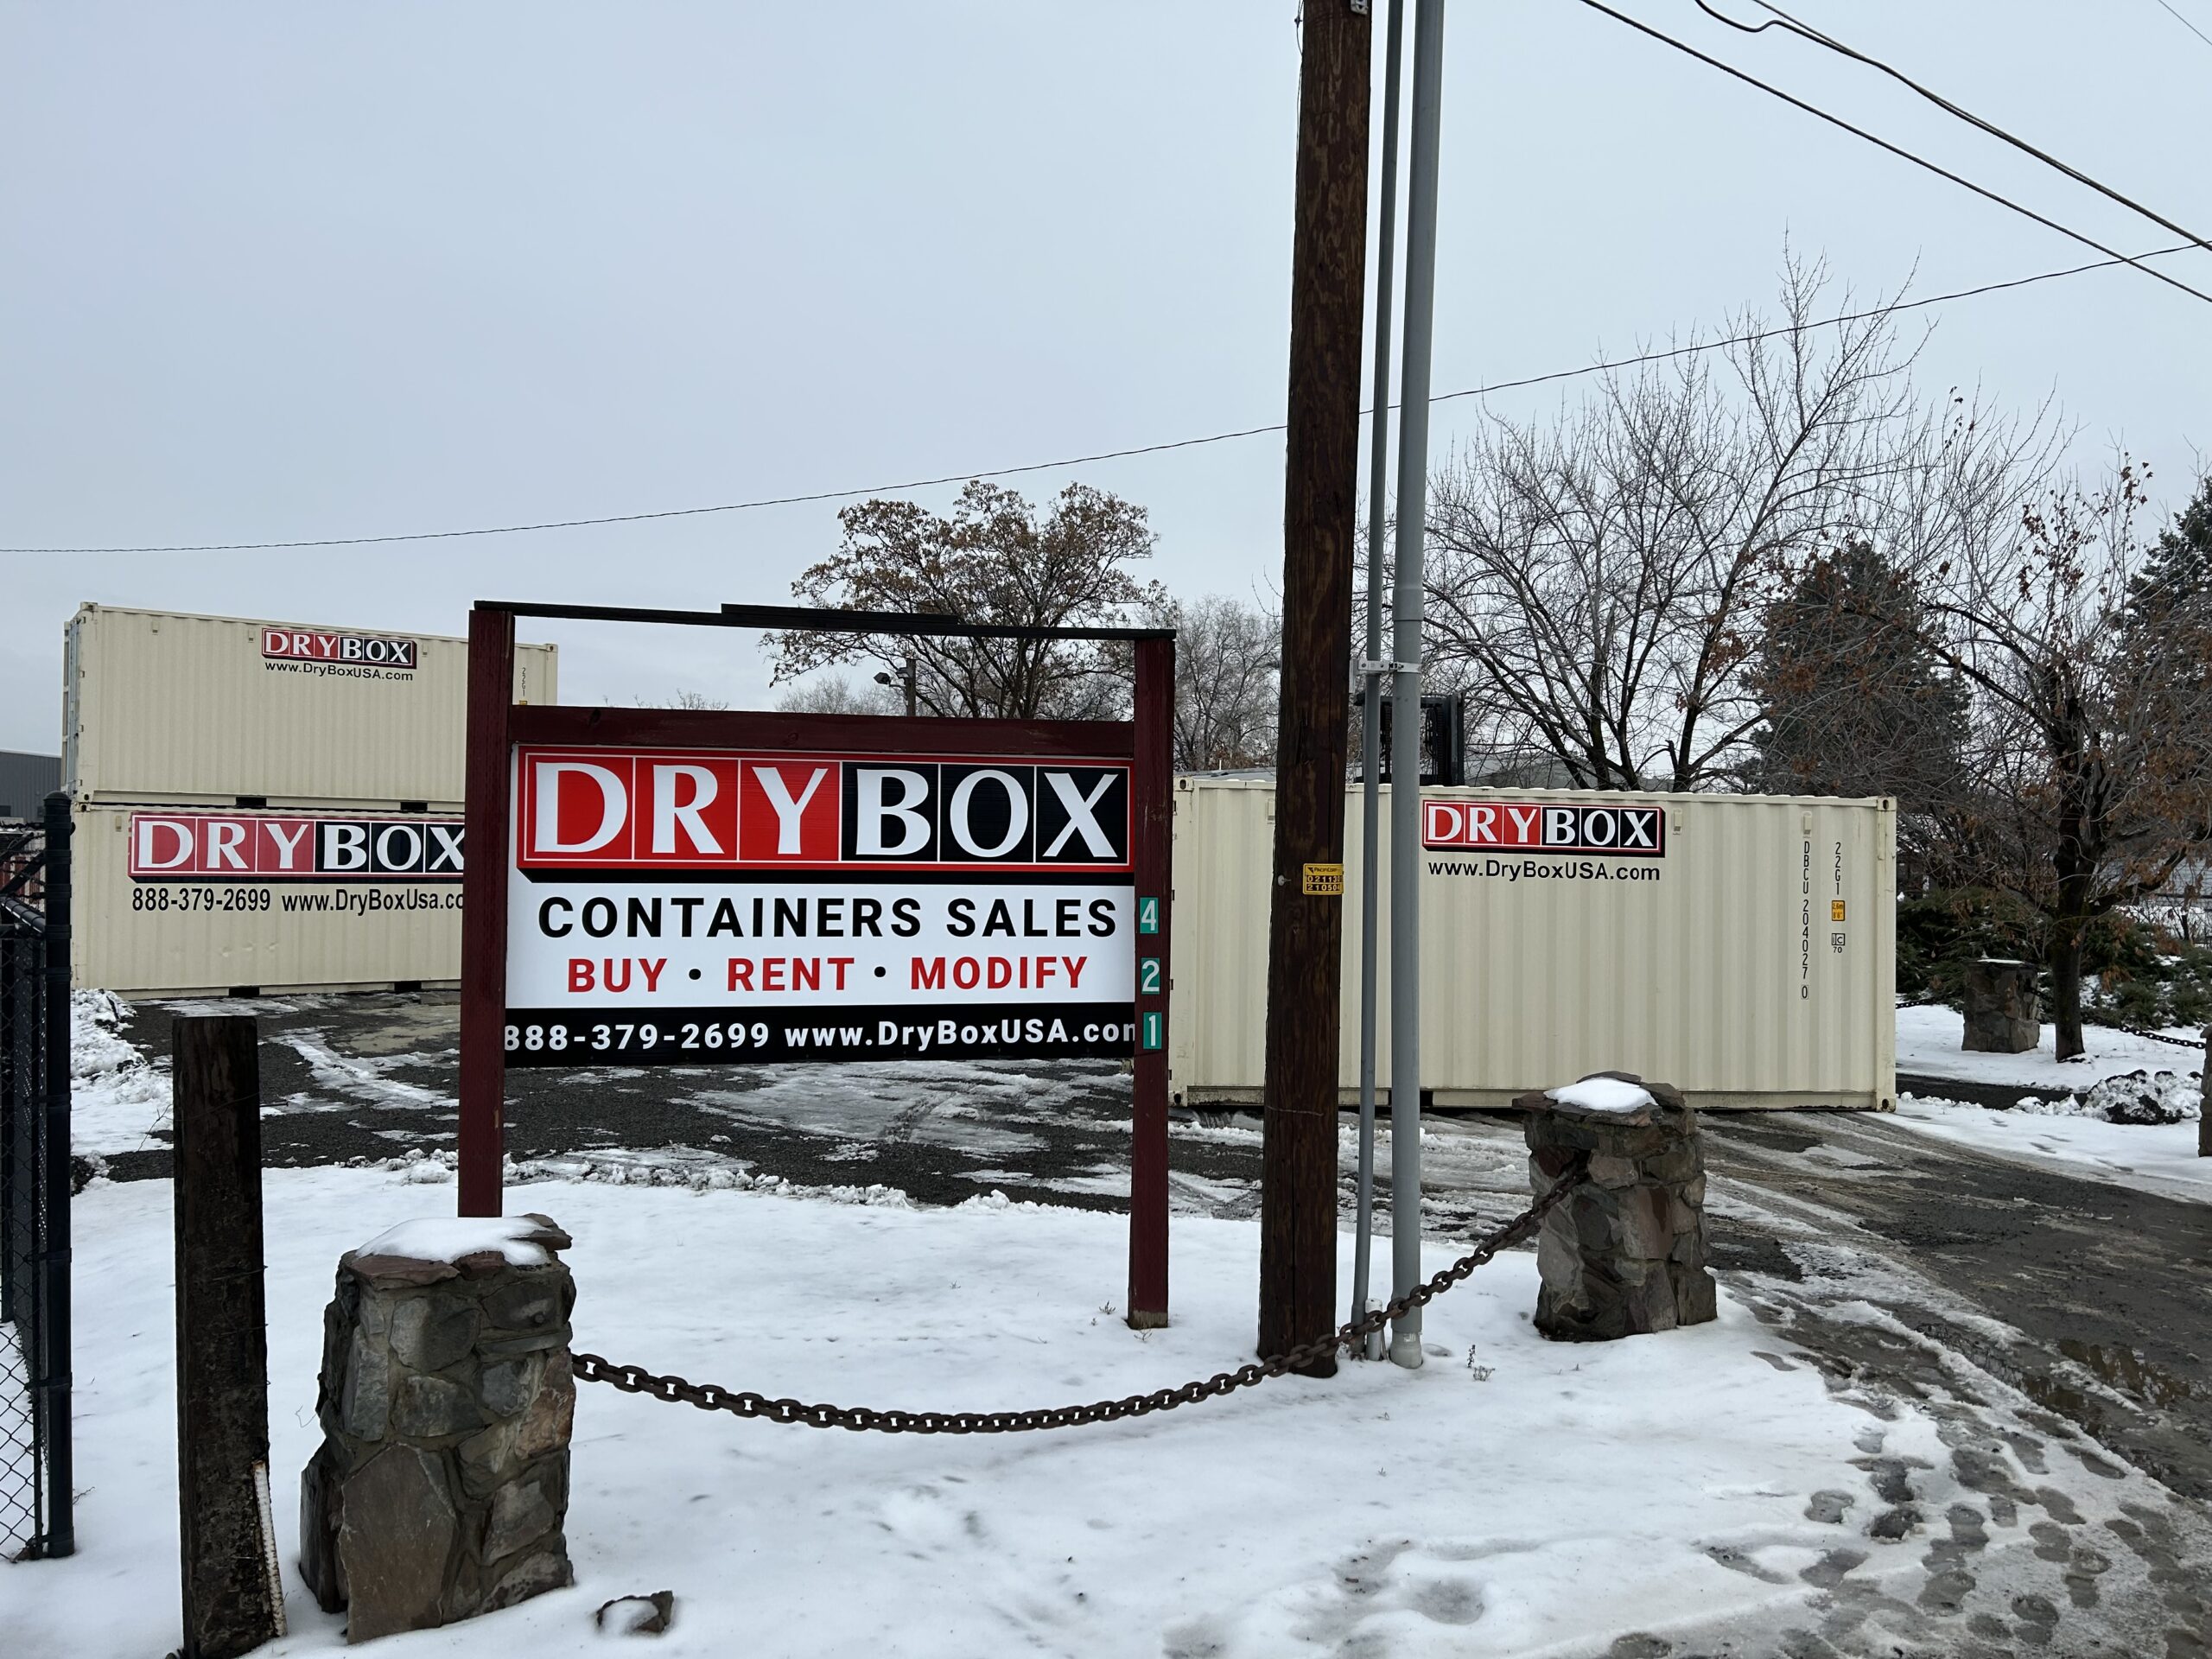 Dry Box's Office and Container Yard in Yakima, WA